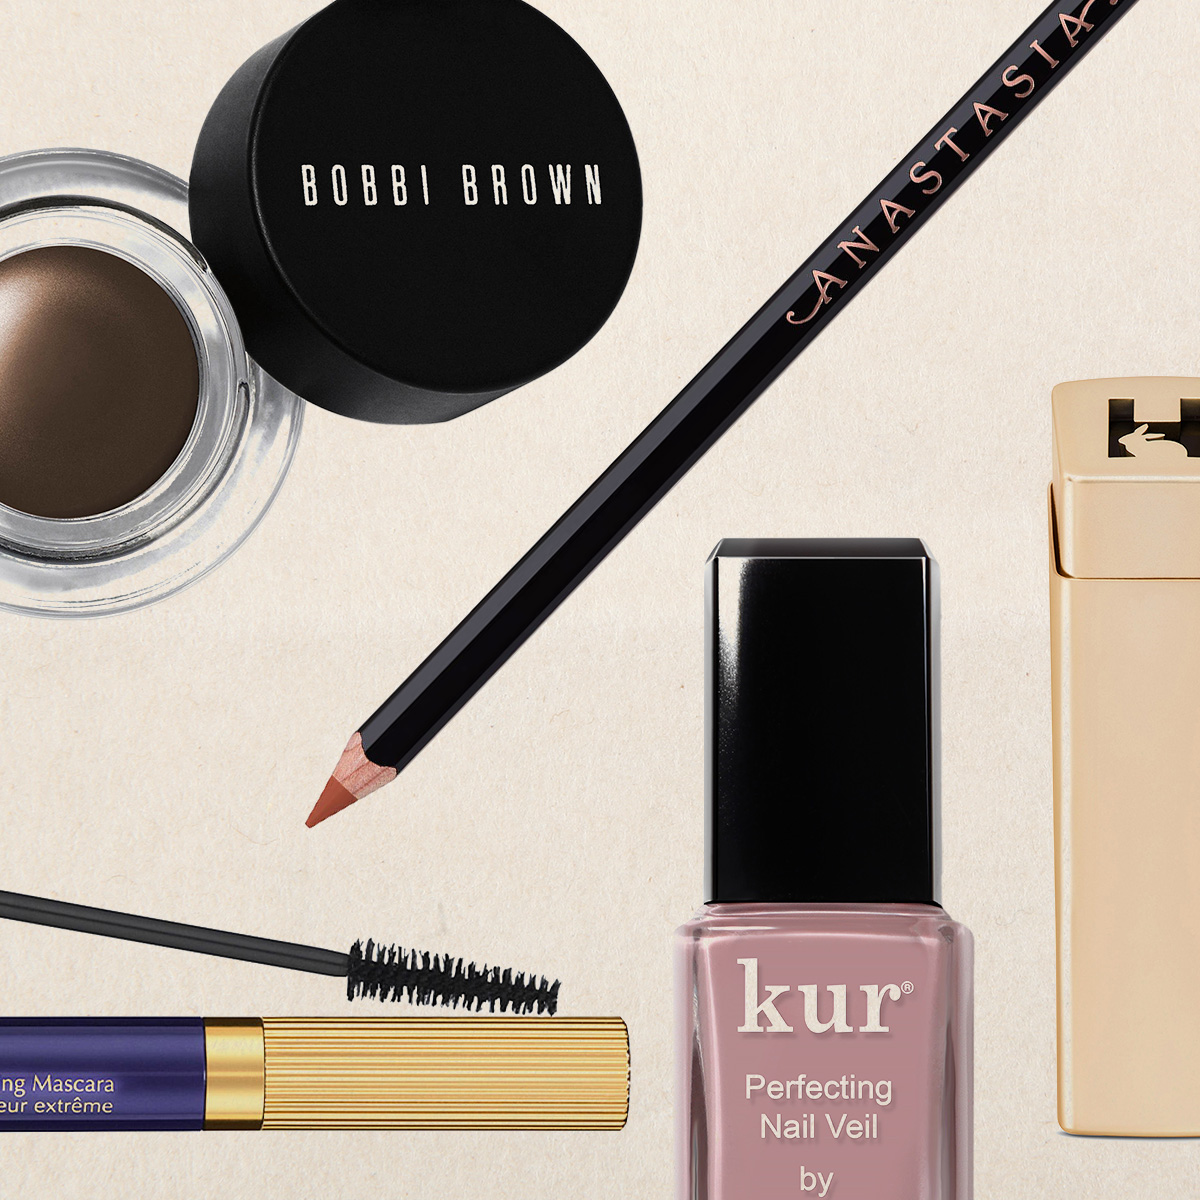 I Rarely Wear Makeup, But I Always Keep These 14 Essentials in My Beauty Drawer